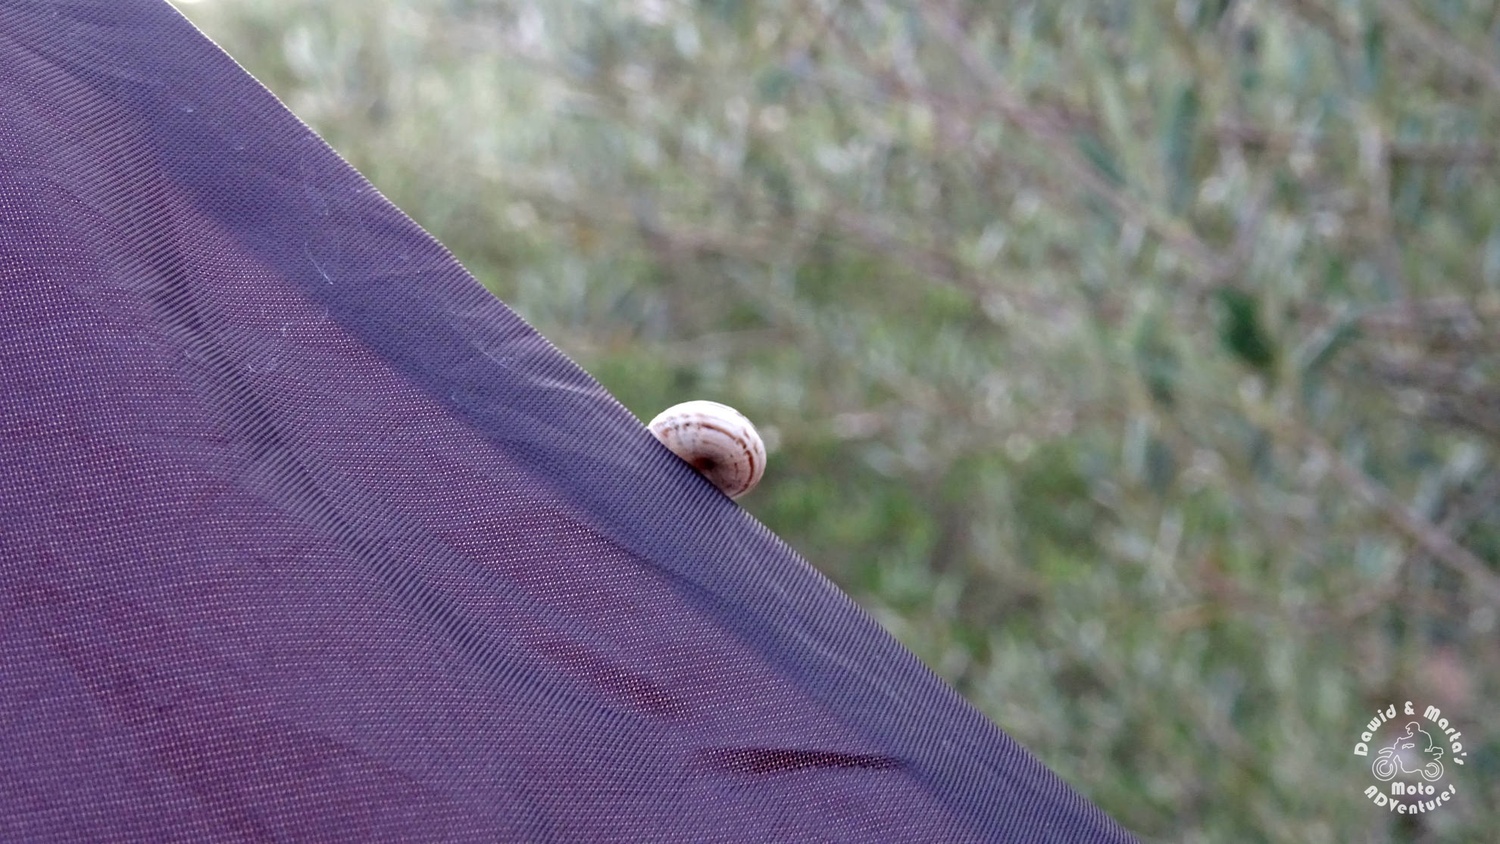 Snail in the tent